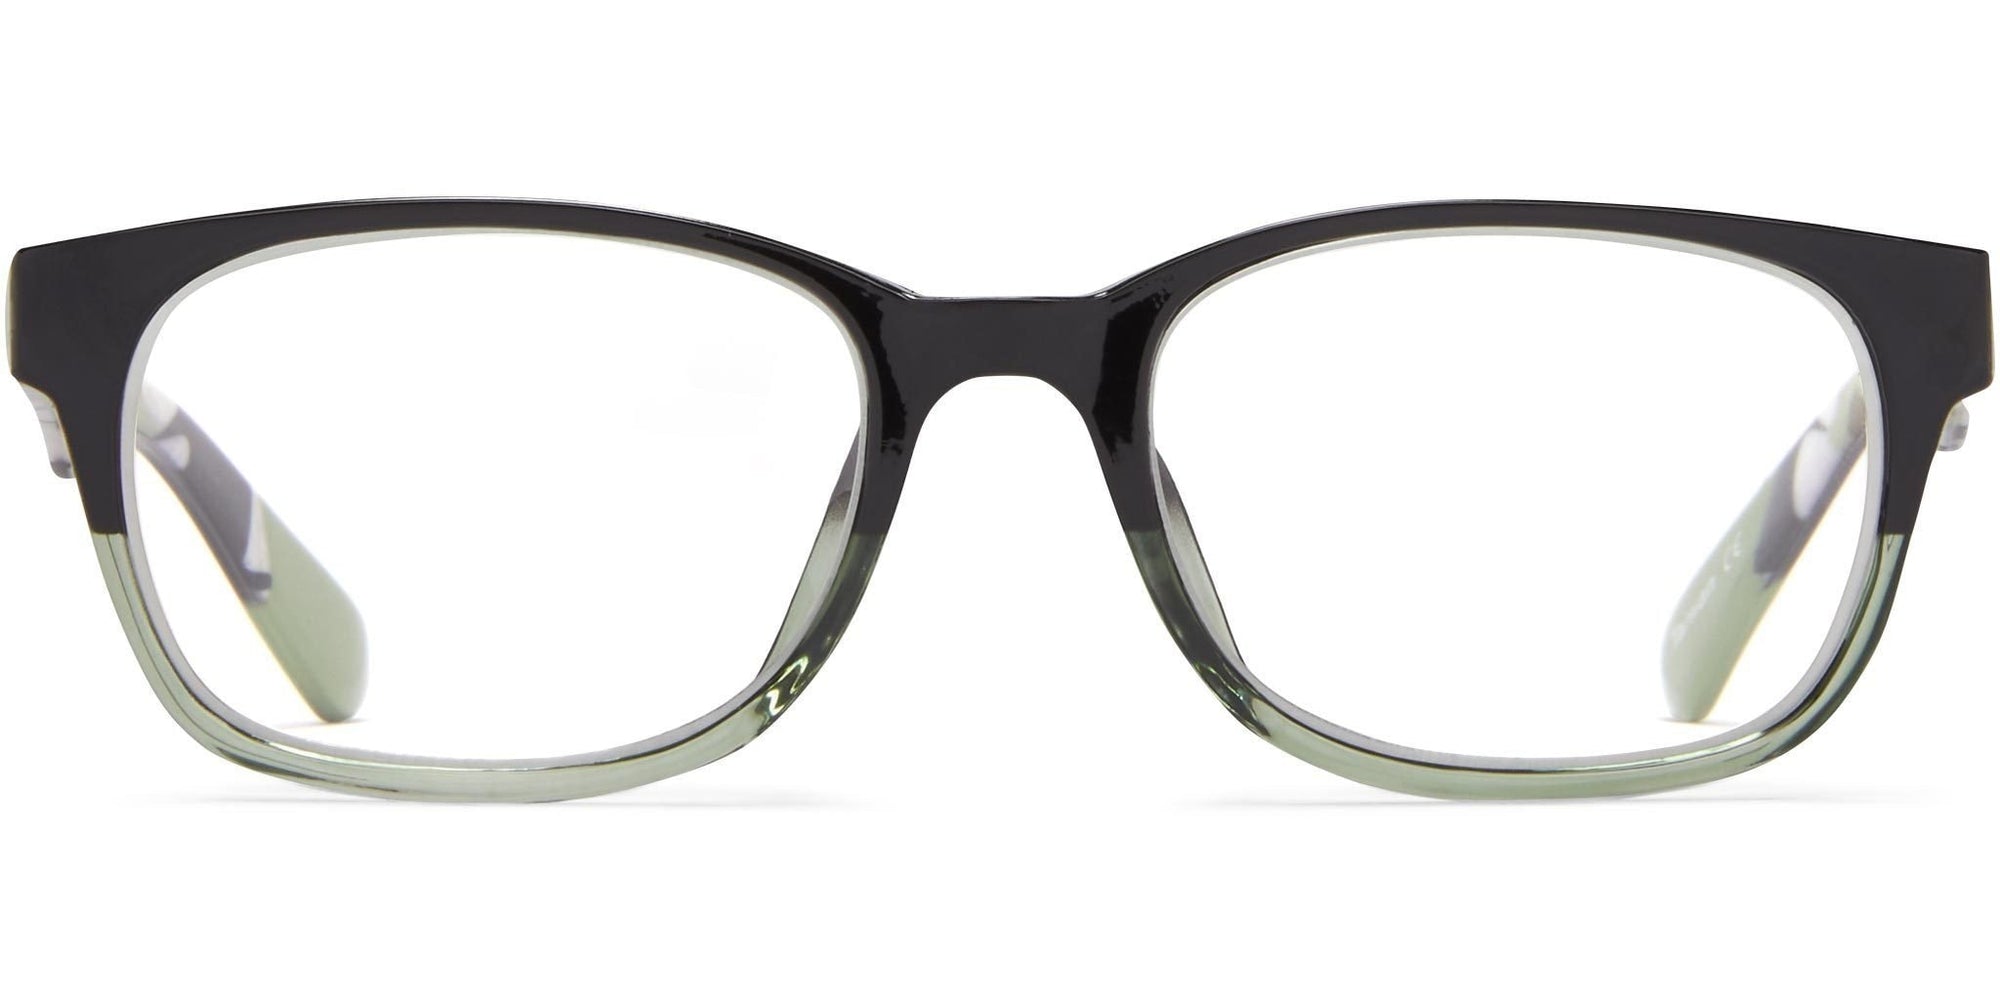 Sapporo - Black with Green / 1.25 - Reading Glasses